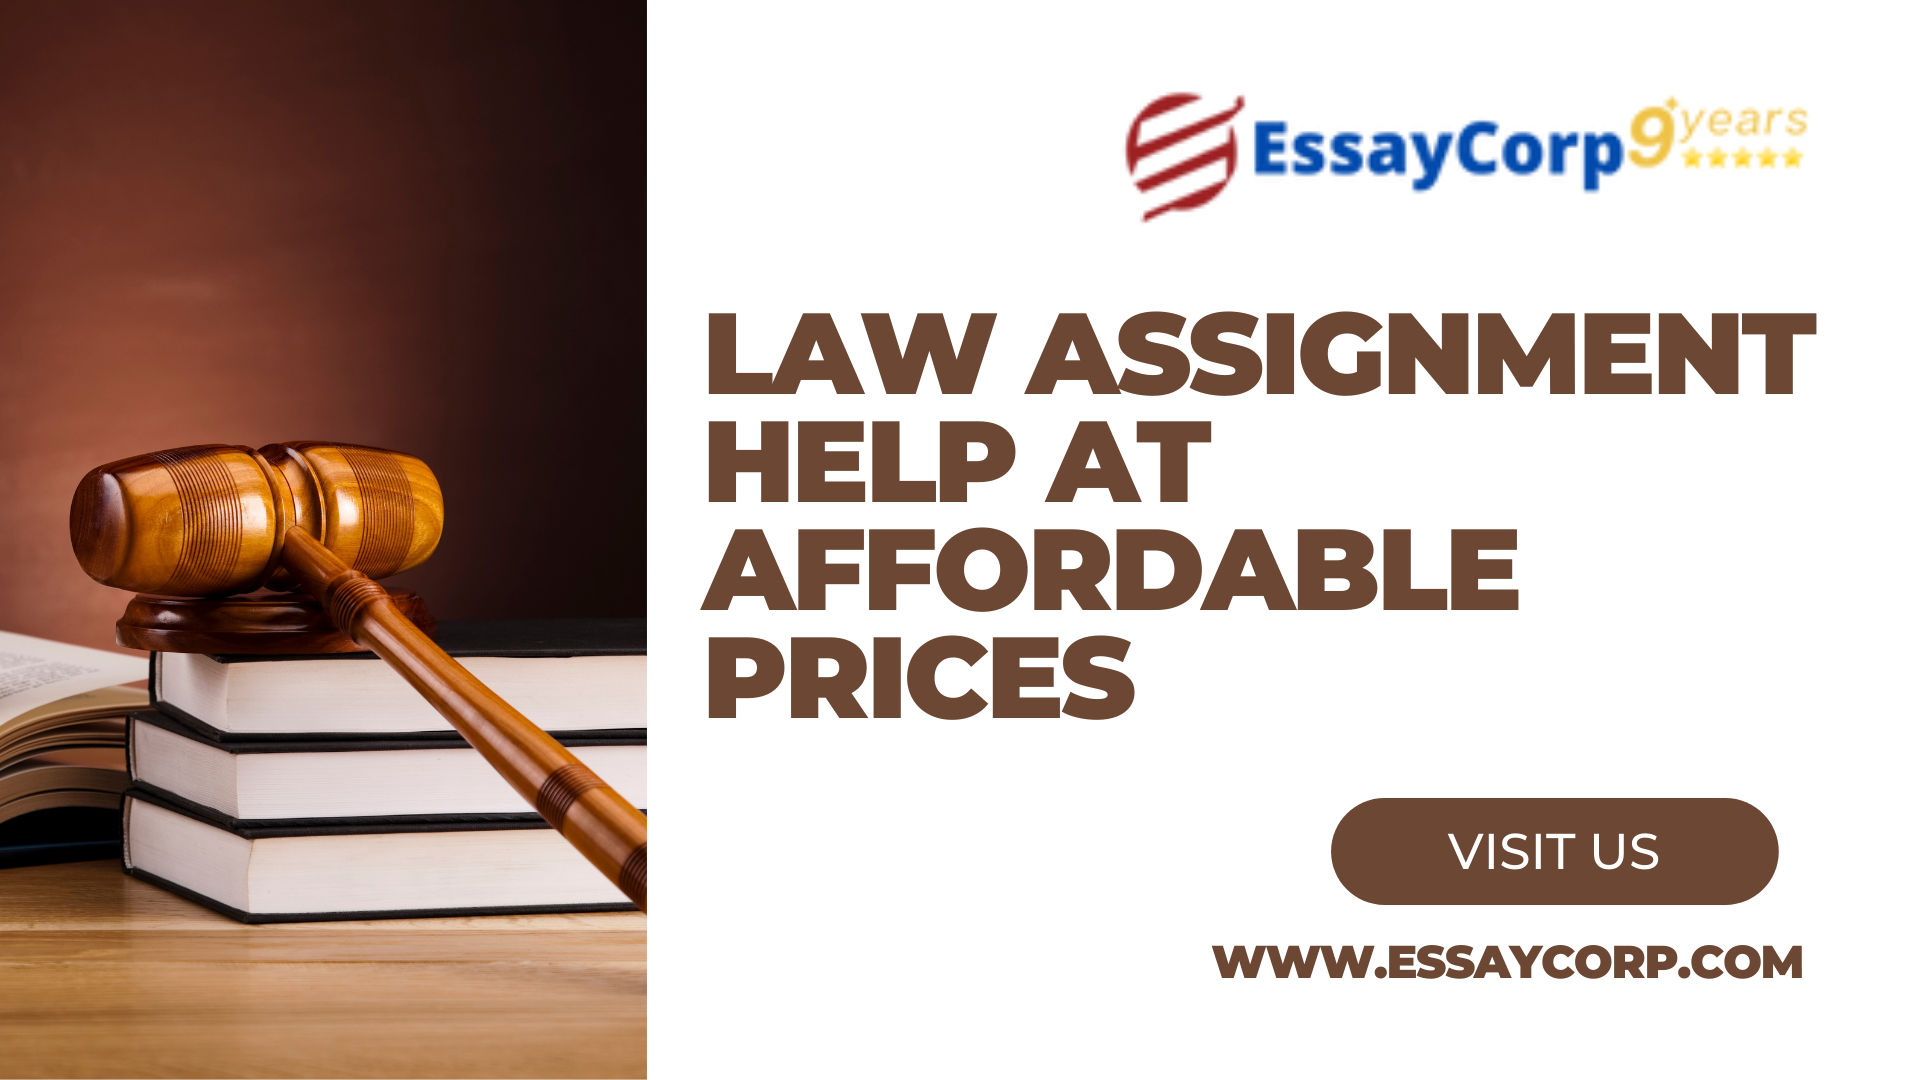 Grasp Top-notch Law Assignment Help at Affordable Prices